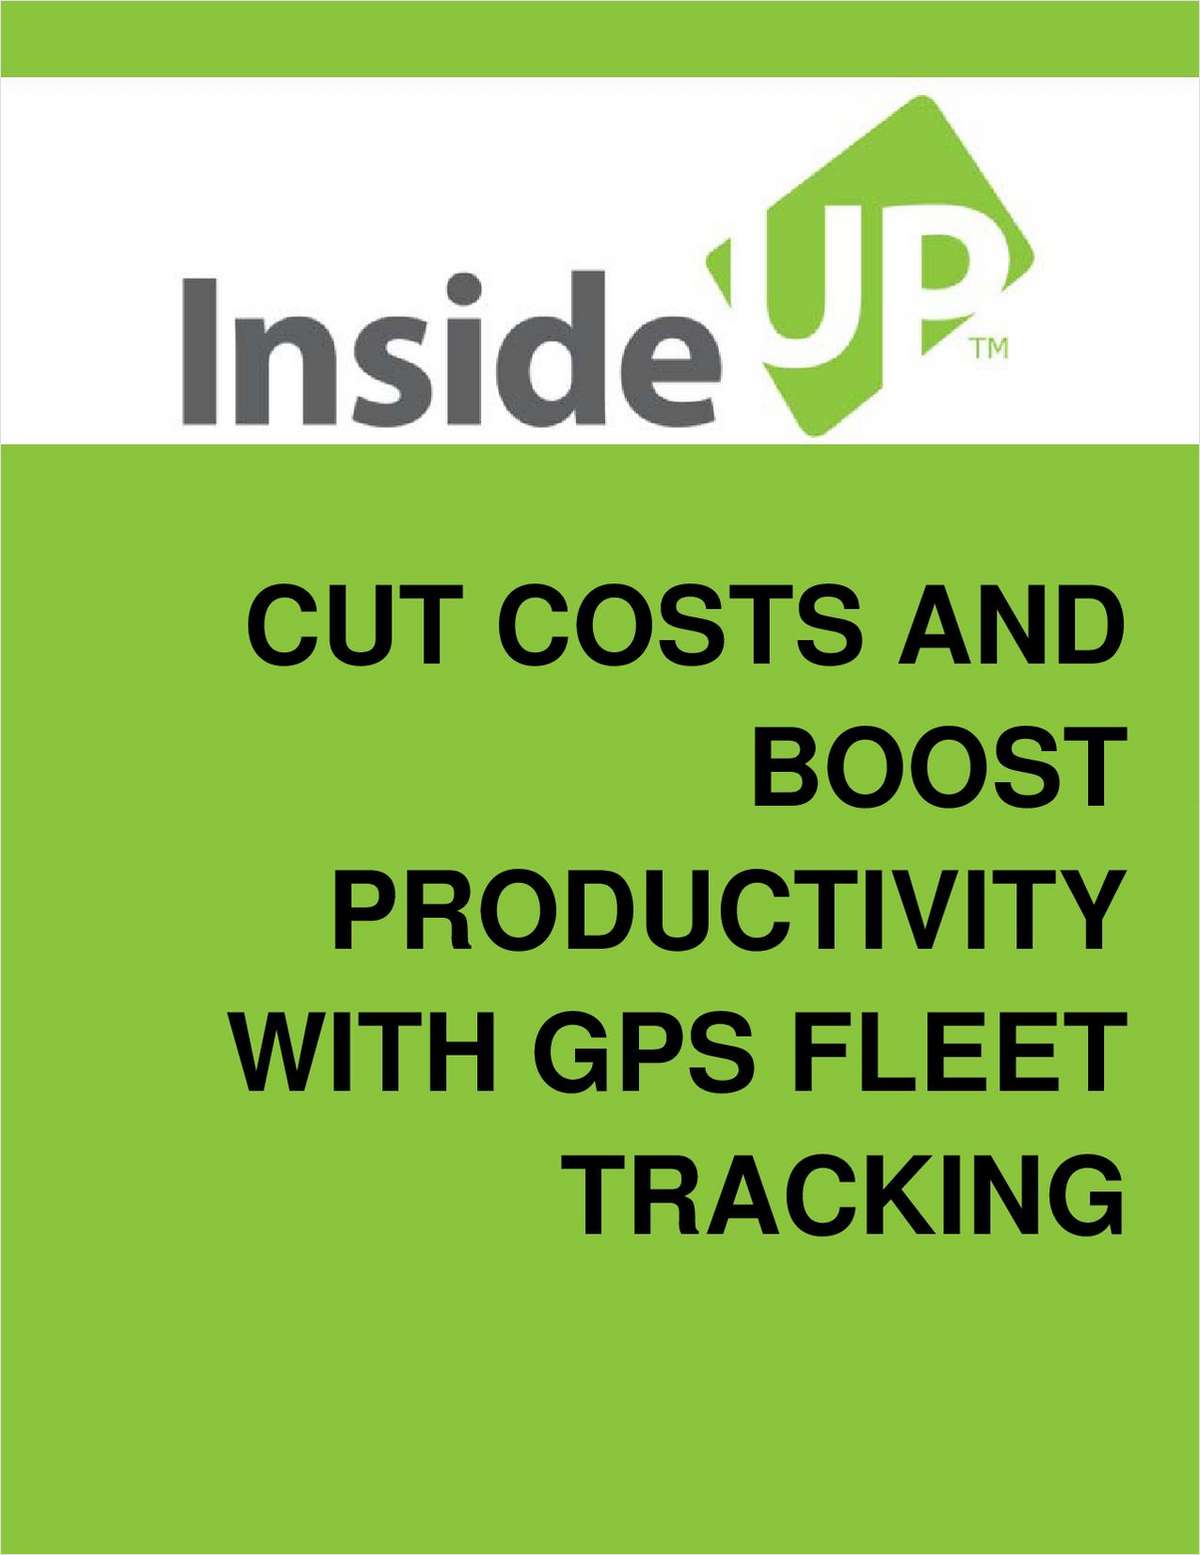 How to Cut Fleet Operations Costs and Boost Productivity With GPS Tracking